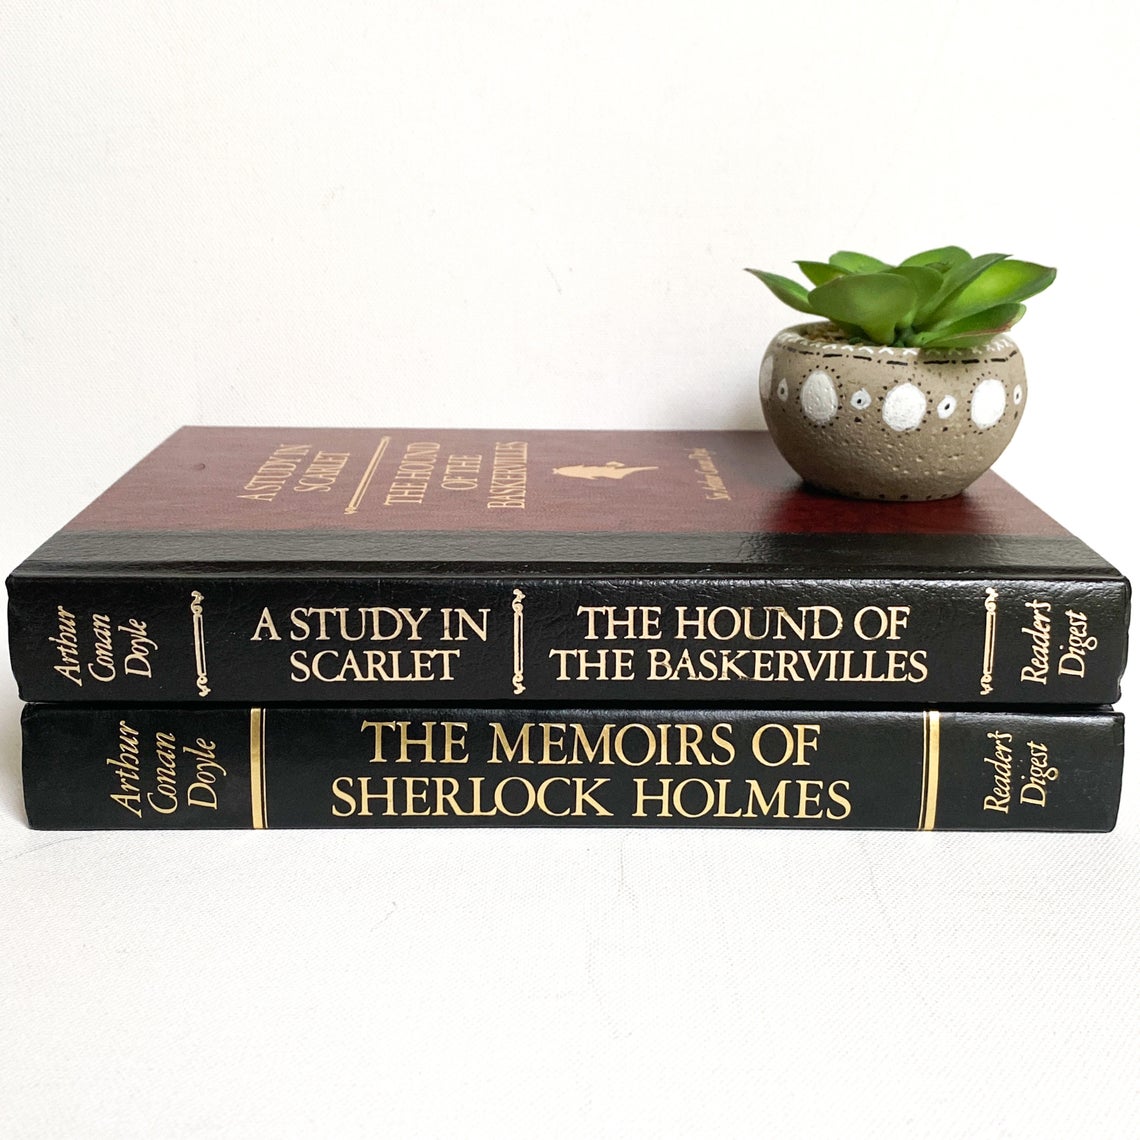 Vintage Sherlock Holmes Book Set, The Hound of Baskervilles, A Study in Scarlet The Memoirs of Sherlock Holmes, both by Sir Arthur Conan Doyle